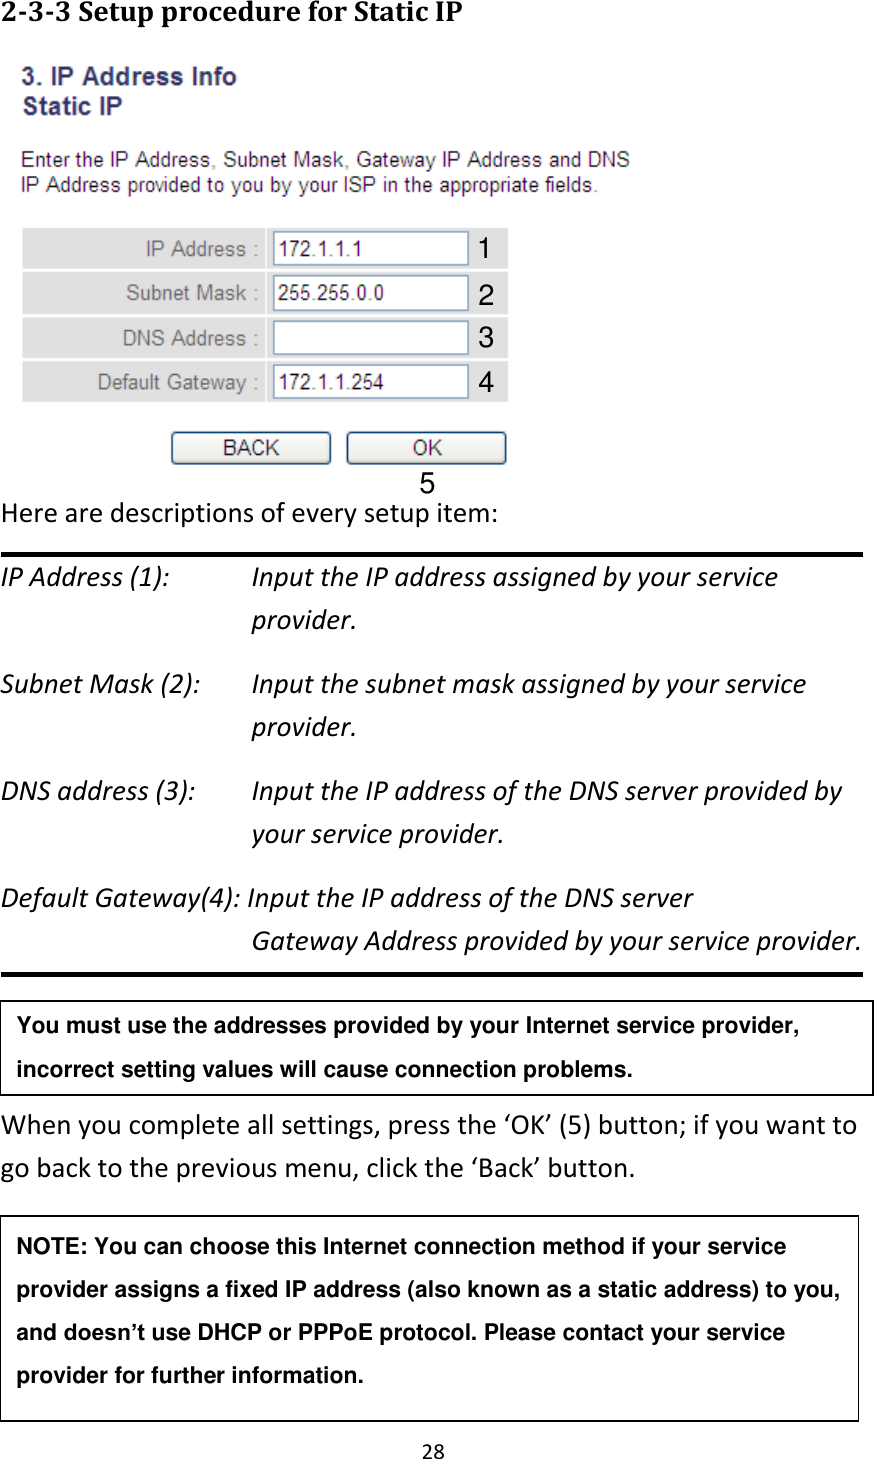 28 2-3-3 Setup procedure for Static IP    Here are descriptions of every setup item: IP Address (1):  Input the IP address assigned by your service provider. Subnet Mask (2):    Input the subnet mask assigned by your service provider.   DNS address (3):    Input the IP address of the DNS server provided by your service provider. Default Gateway(4): Input the IP address of the DNS server Gateway Address provided by your service provider.   When you complete all settings, press the ‘OK’ (5) button; if you want to go back to the previous menu, click the ‘Back’ button.    1 2 3 4 5 NOTE: You can choose this Internet connection method if your service provider assigns a fixed IP address (also known as a static address) to you, and doesn’t use DHCP or PPPoE protocol. Please contact your service provider for further information. You must use the addresses provided by your Internet service provider, incorrect setting values will cause connection problems.    